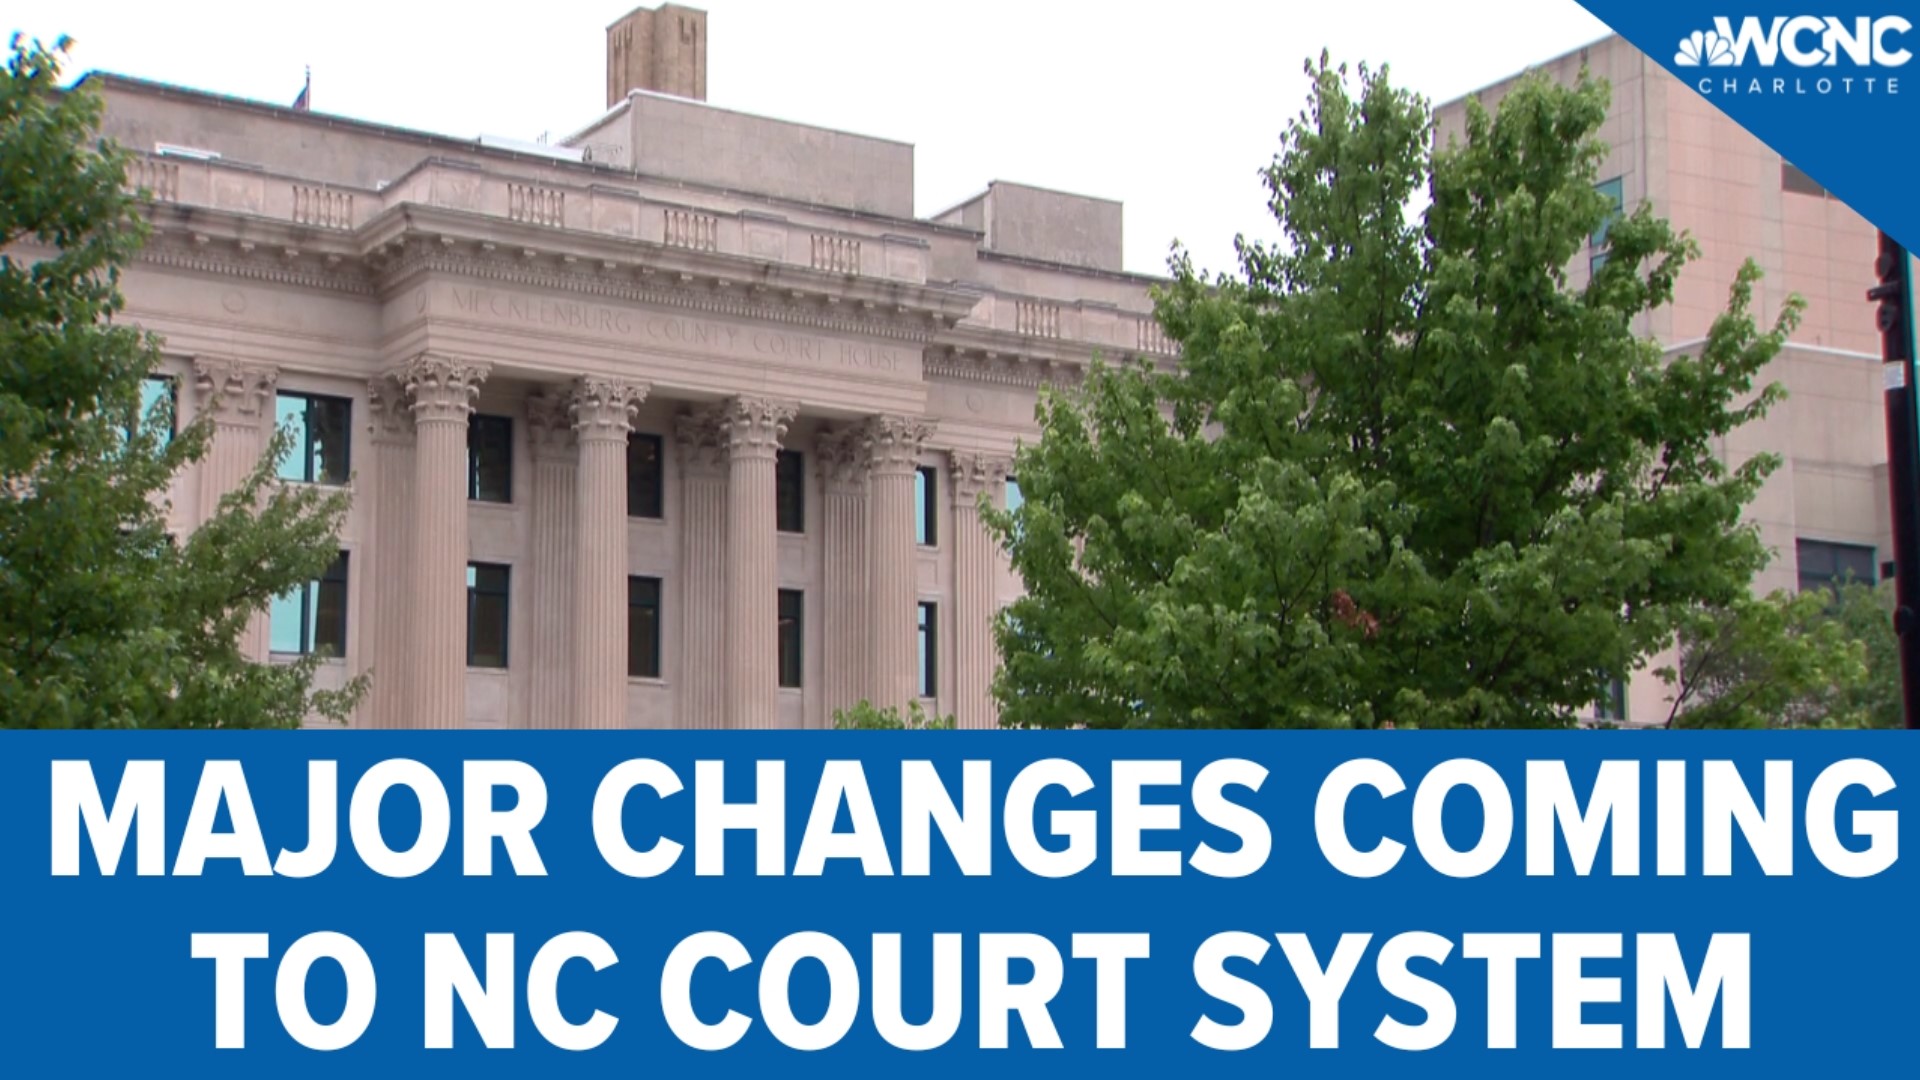 The upgrade already has a history of issues across the country, including shutting down courts temporarily.